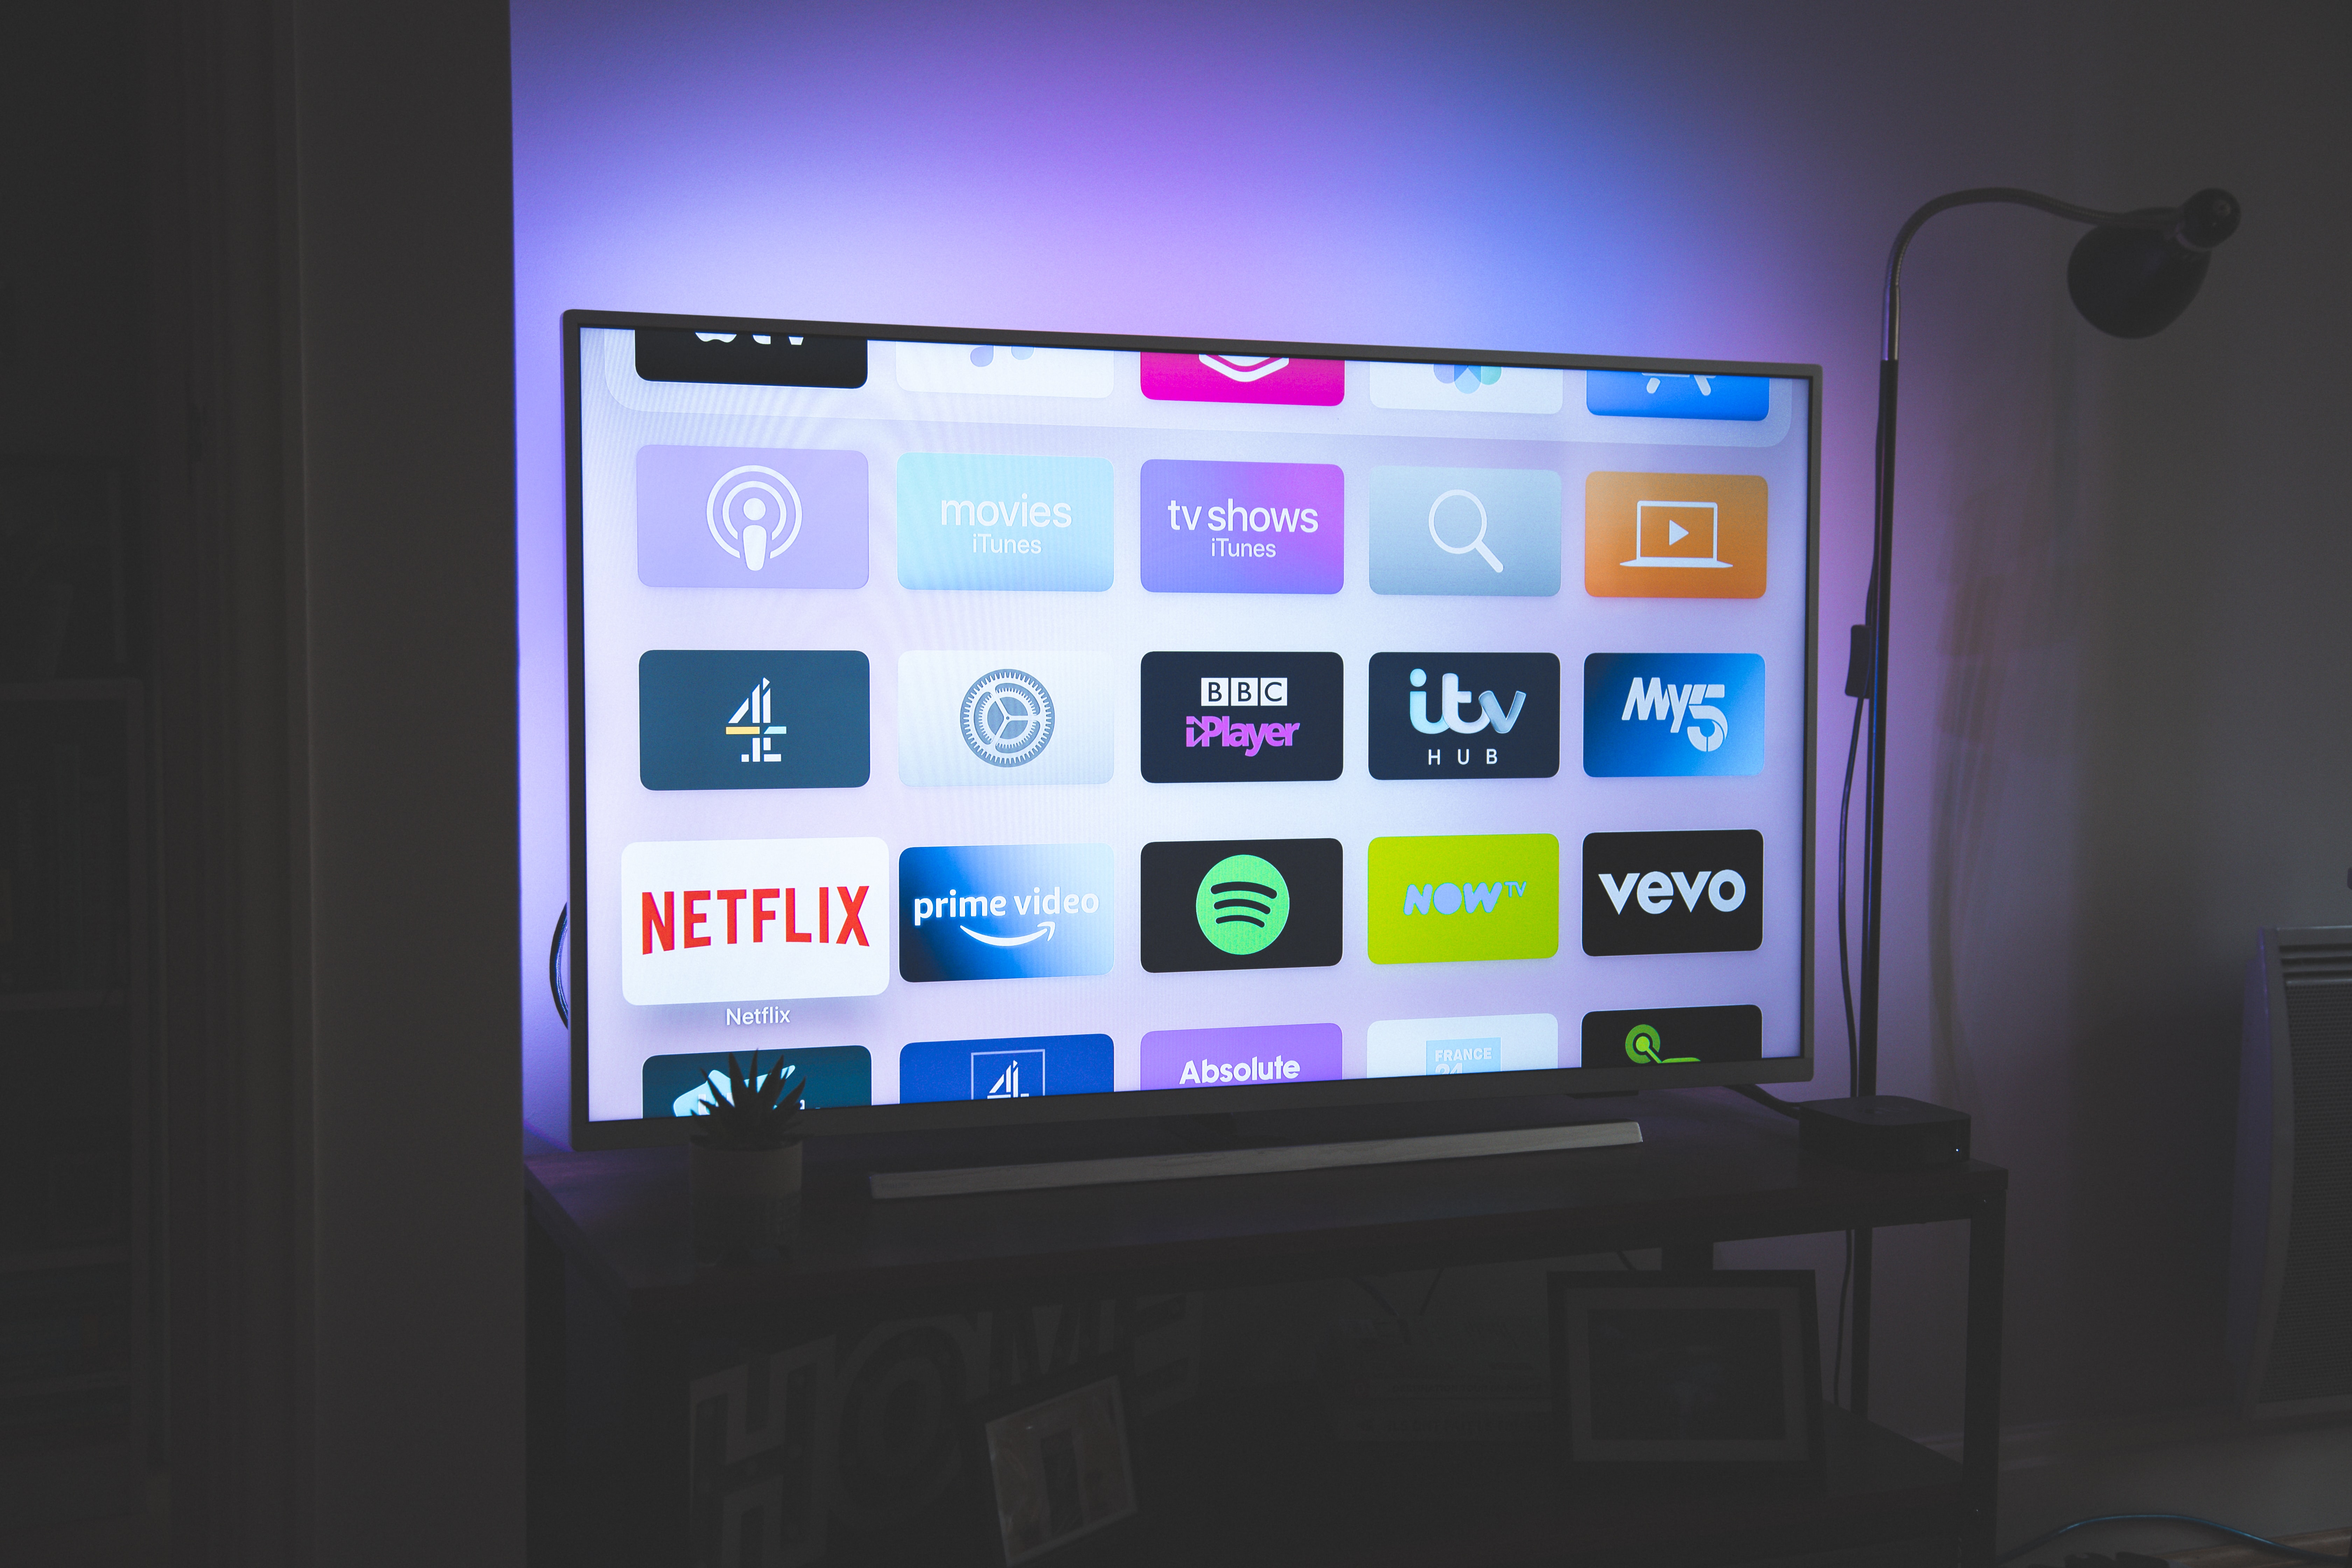 India’s Smart TV Shipments Up 74% YoY During Q2 2022, OnePlus Climbs to Third Position